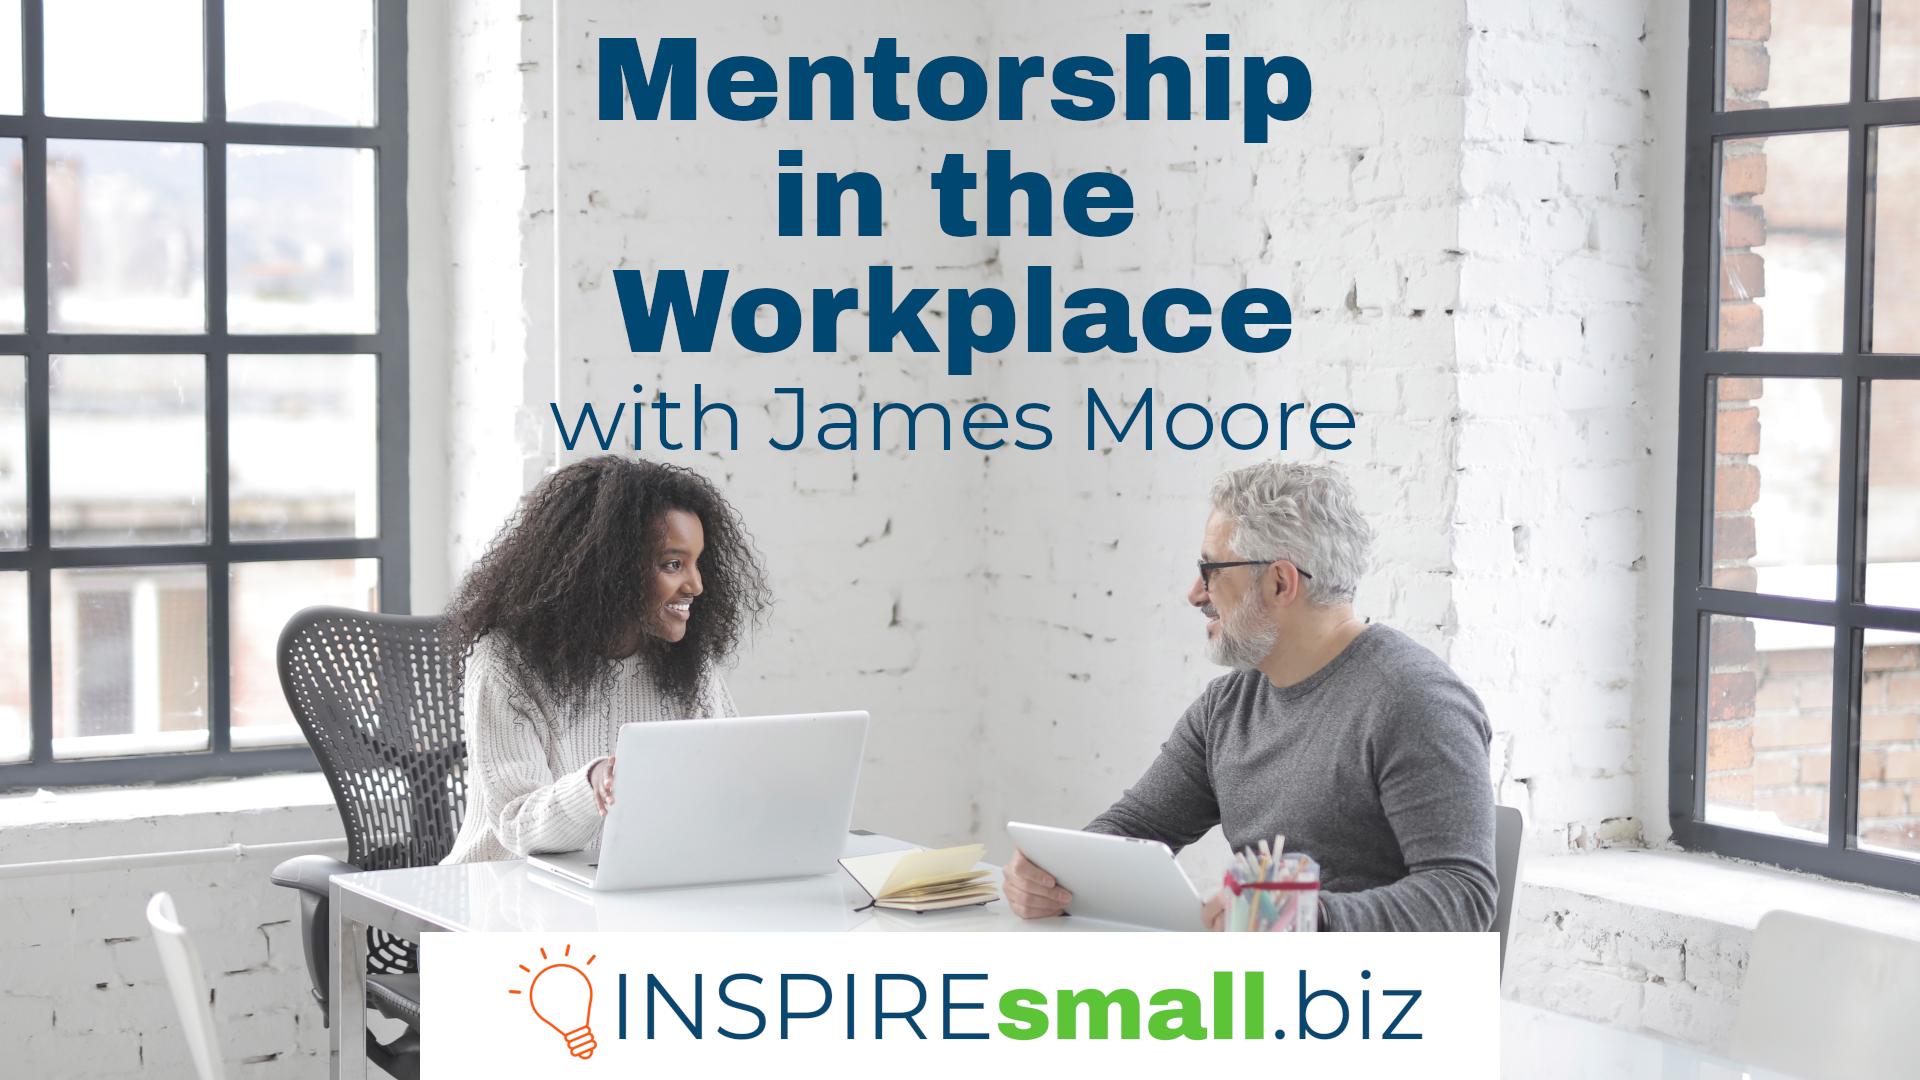 James Moore joins us to share how mentorship in the workplace creates a stronger workplace culture and reduces employee turnover.